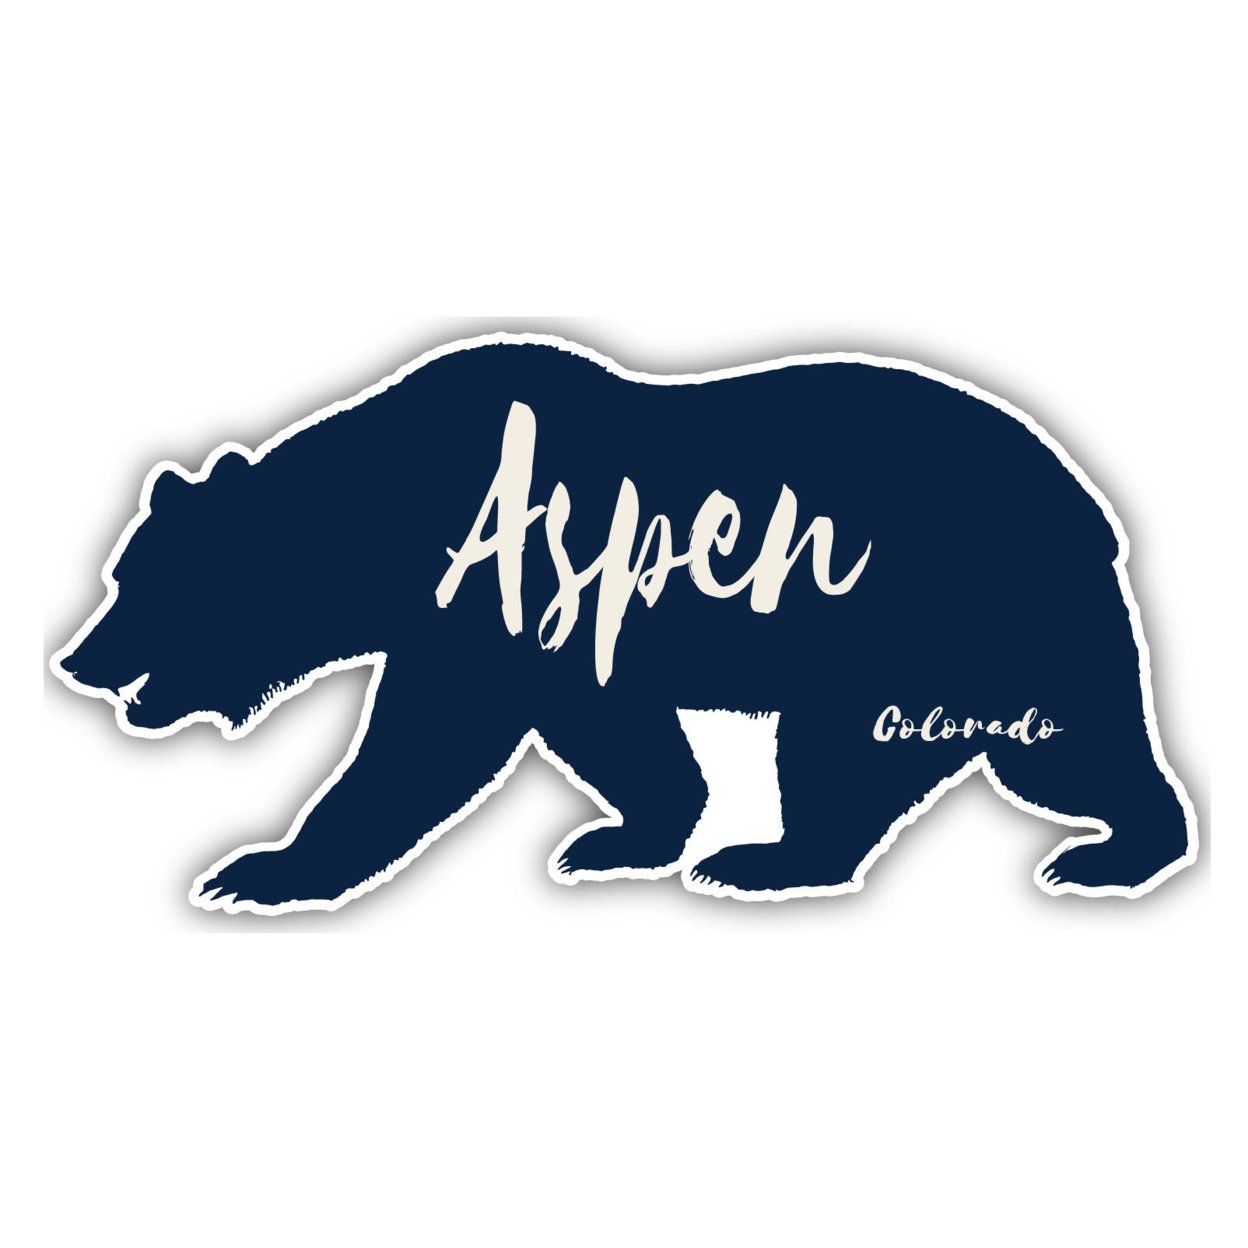 Aspen Colorado Souvenir Decorative Stickers (Choose Theme And Size) - 4-Pack, 12-Inch, Great Outdoors